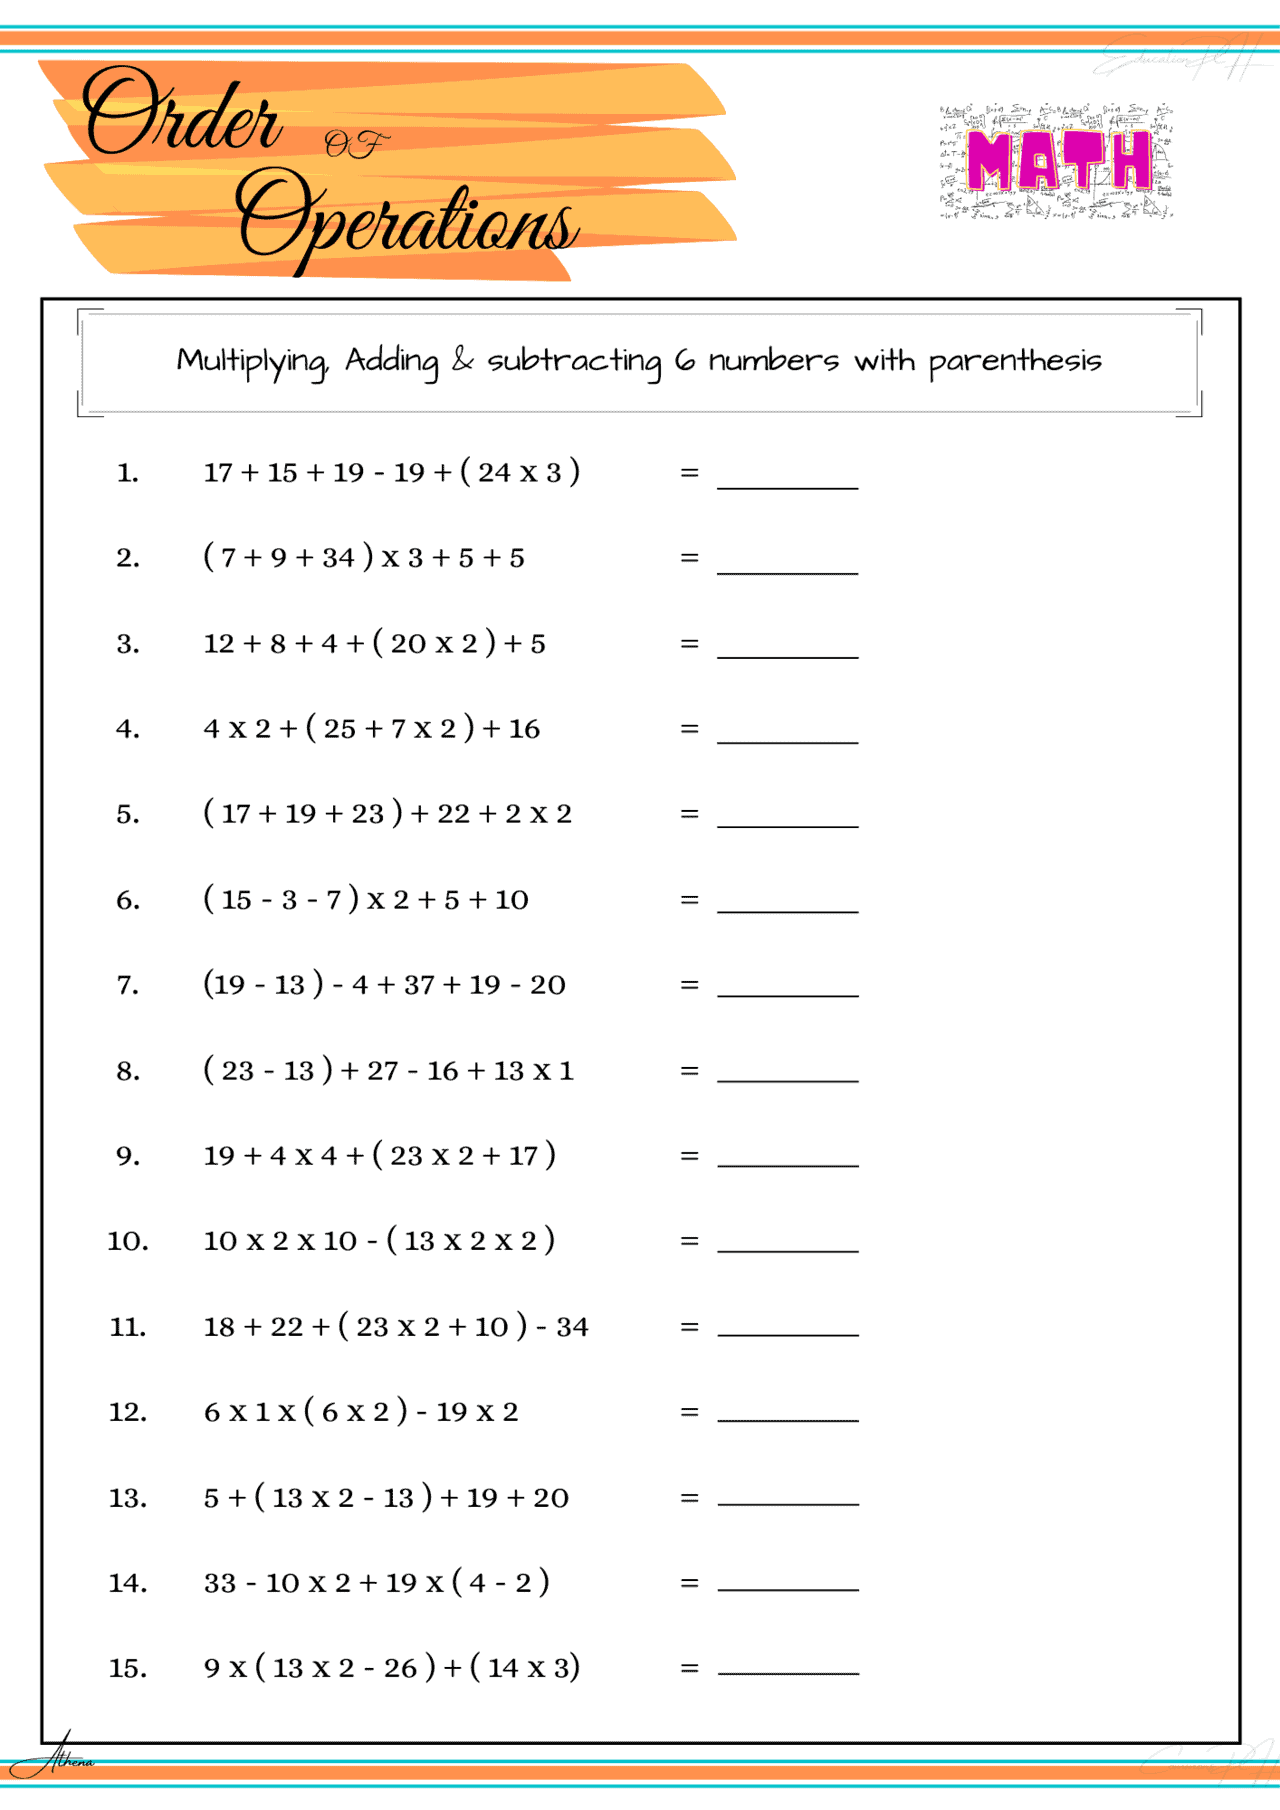 Order Of Operations Worksheet Multiple Choice